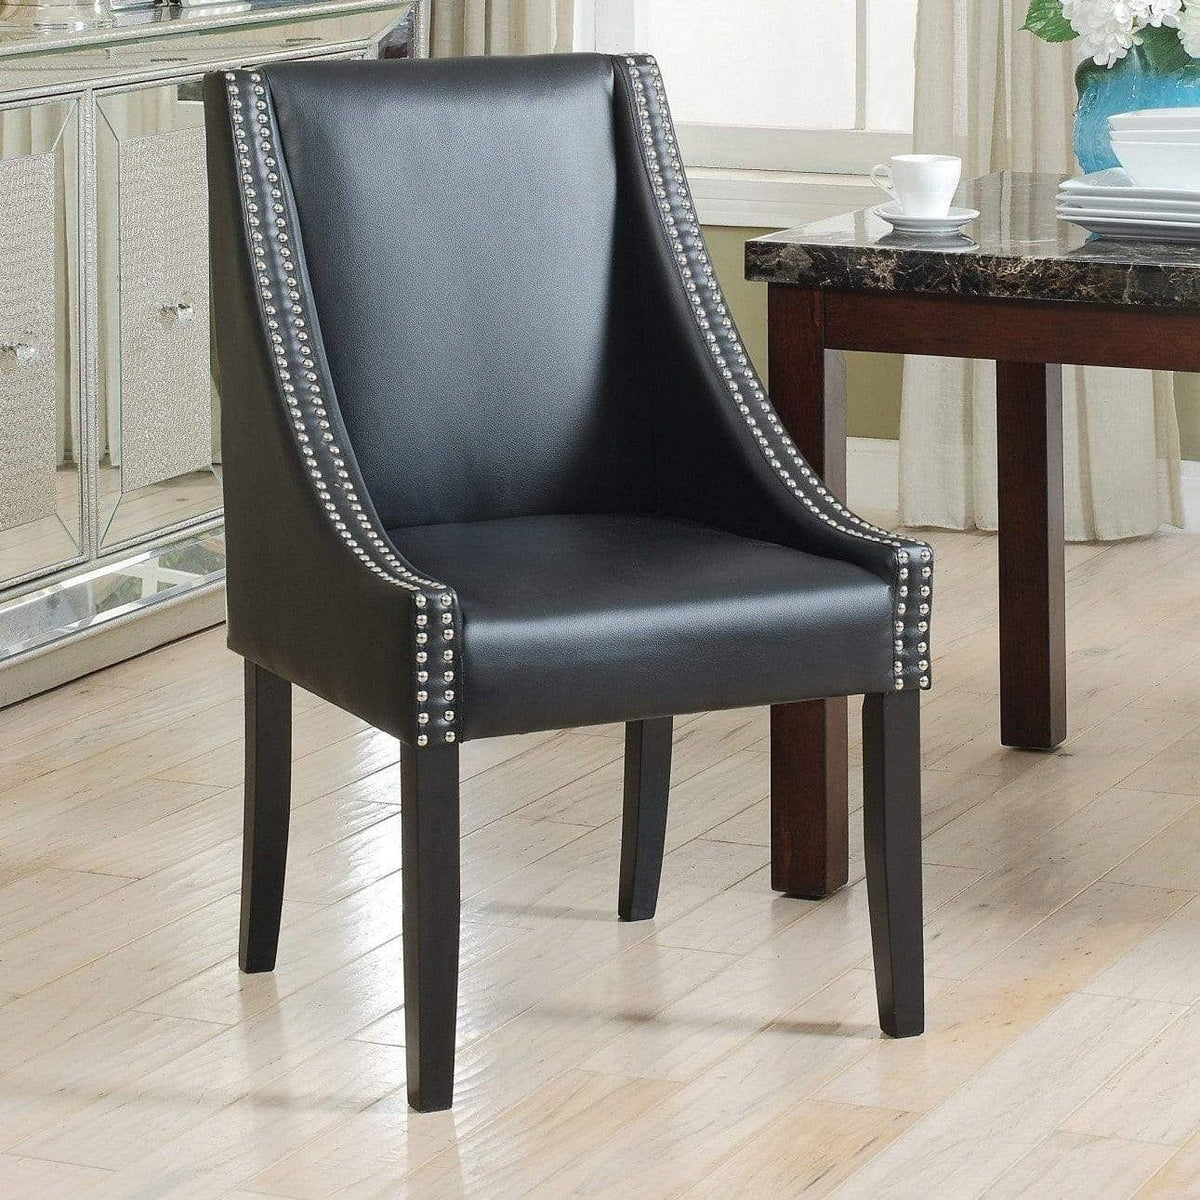 Iconic Home Lincoln Faux Leather Dining Chair Set of 2 Black